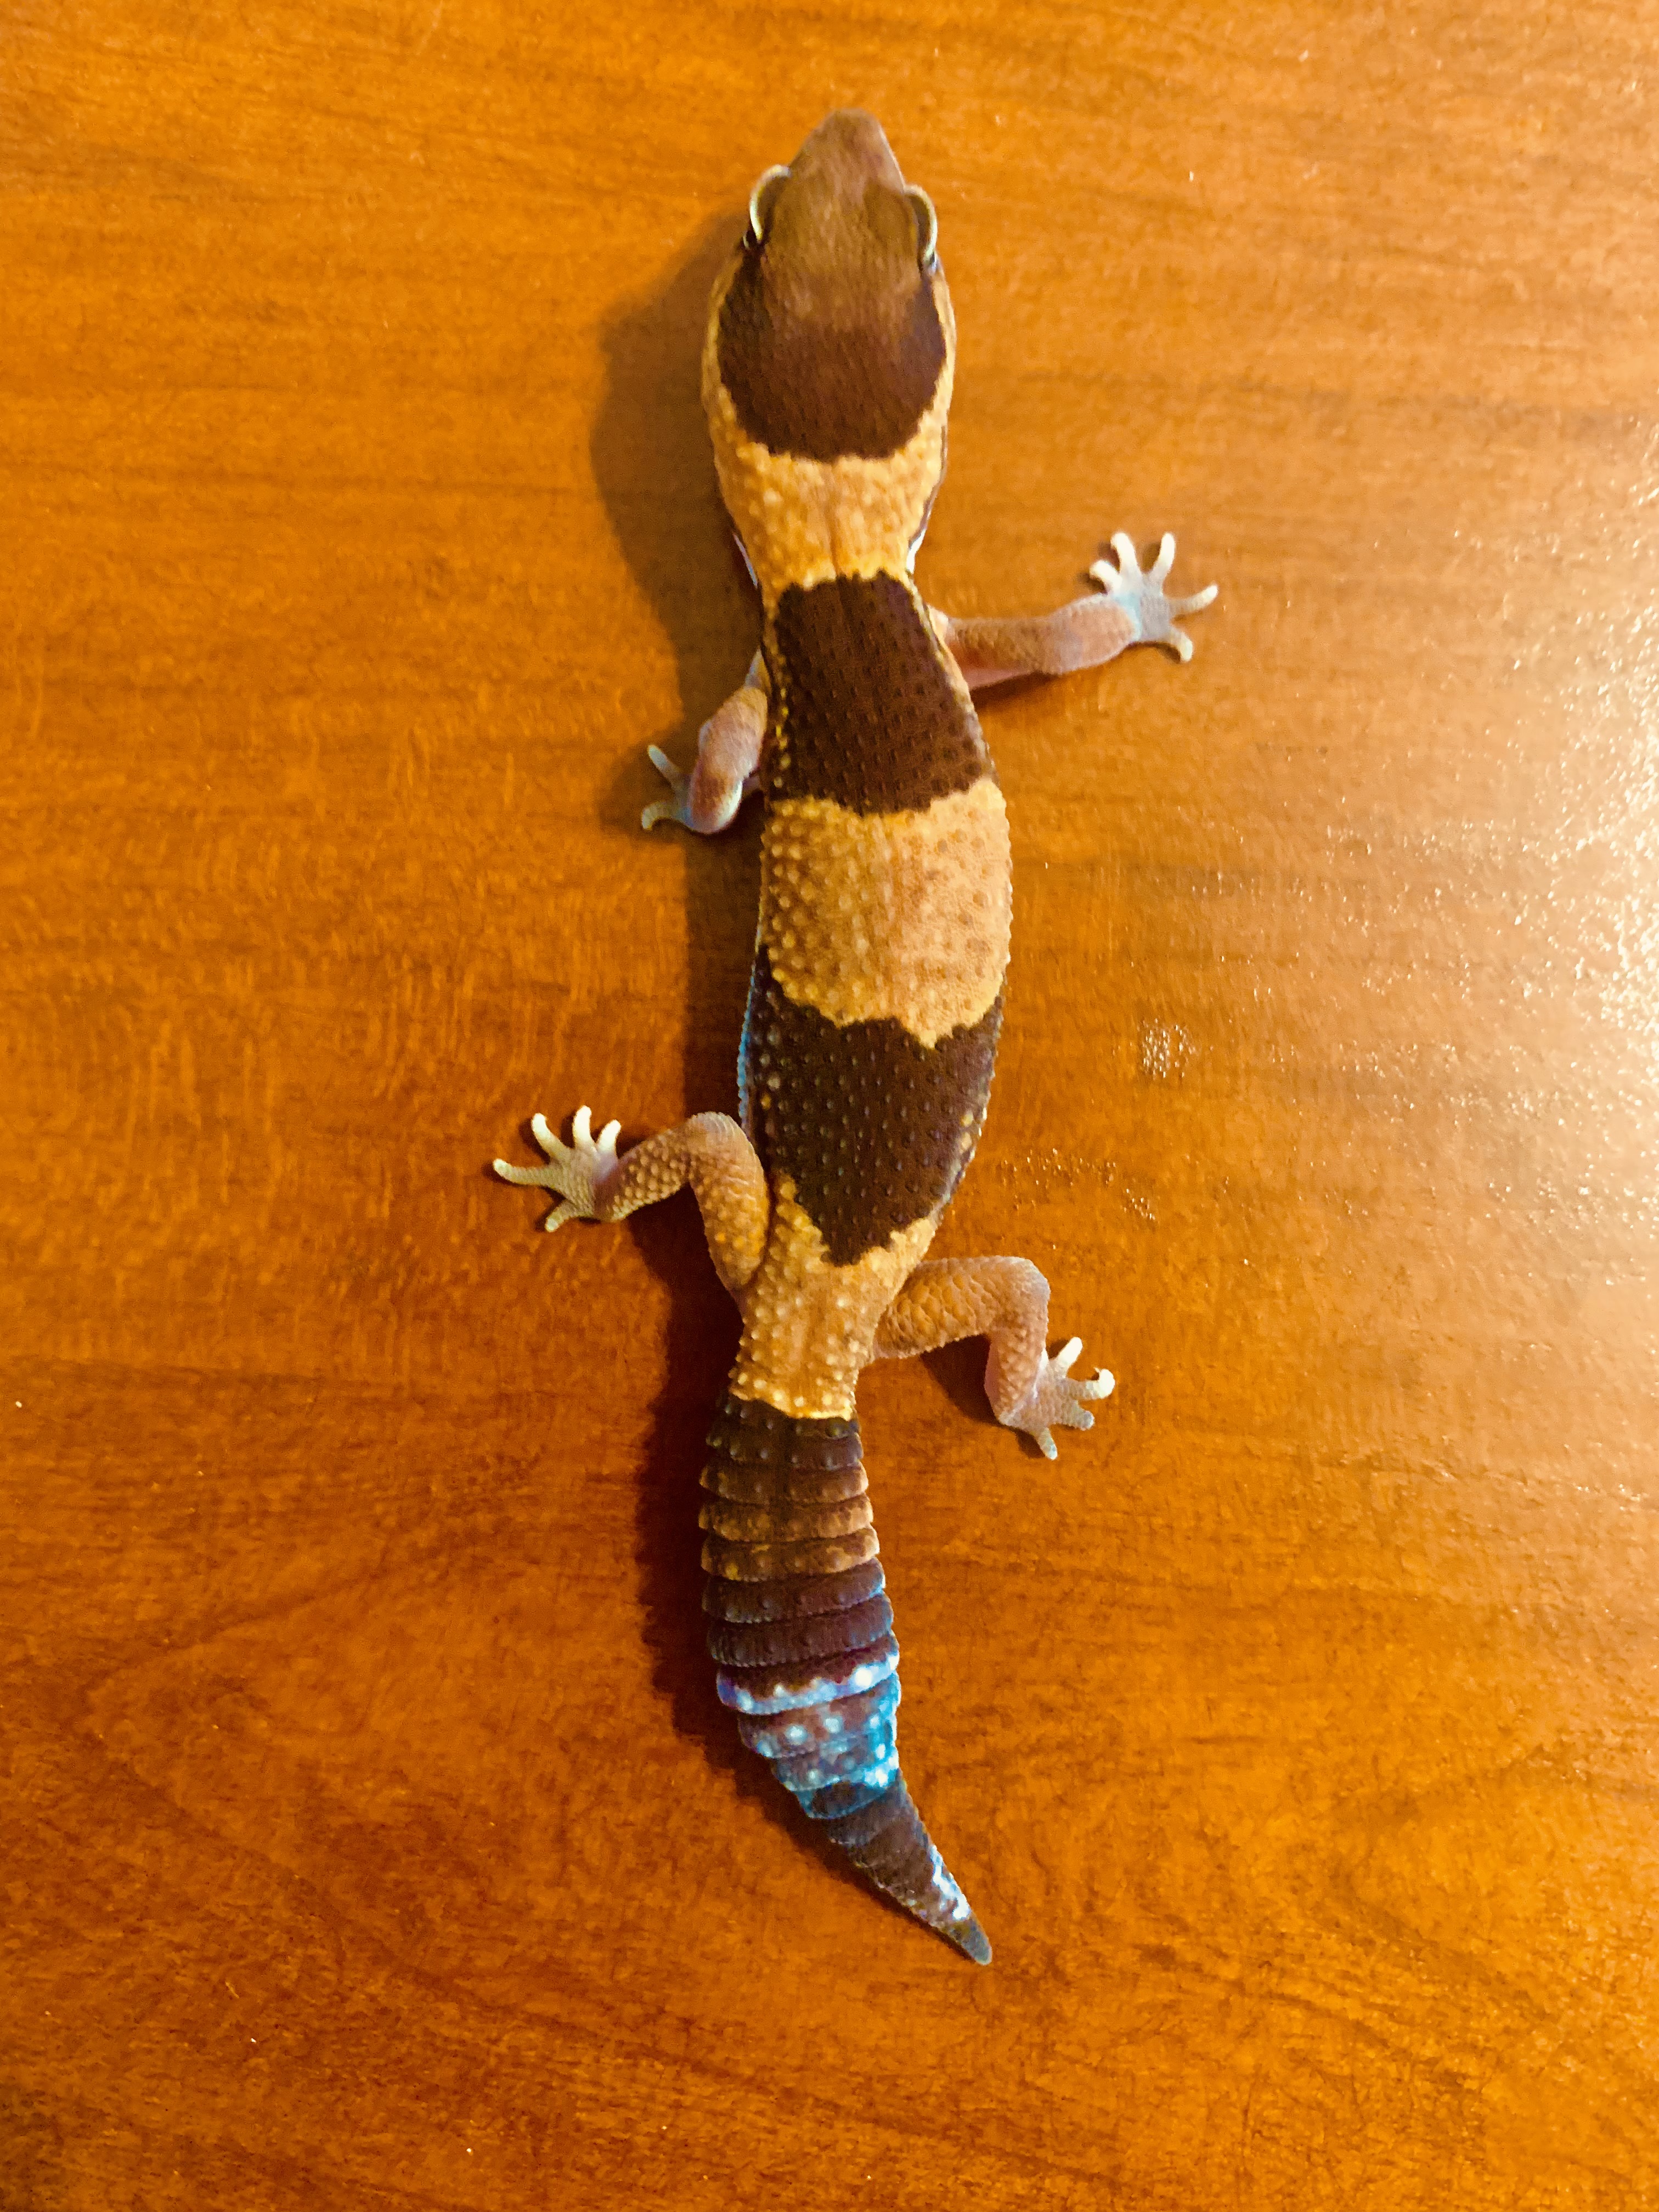 Normal African Fat-Tailed Gecko by Phelp's Geckos